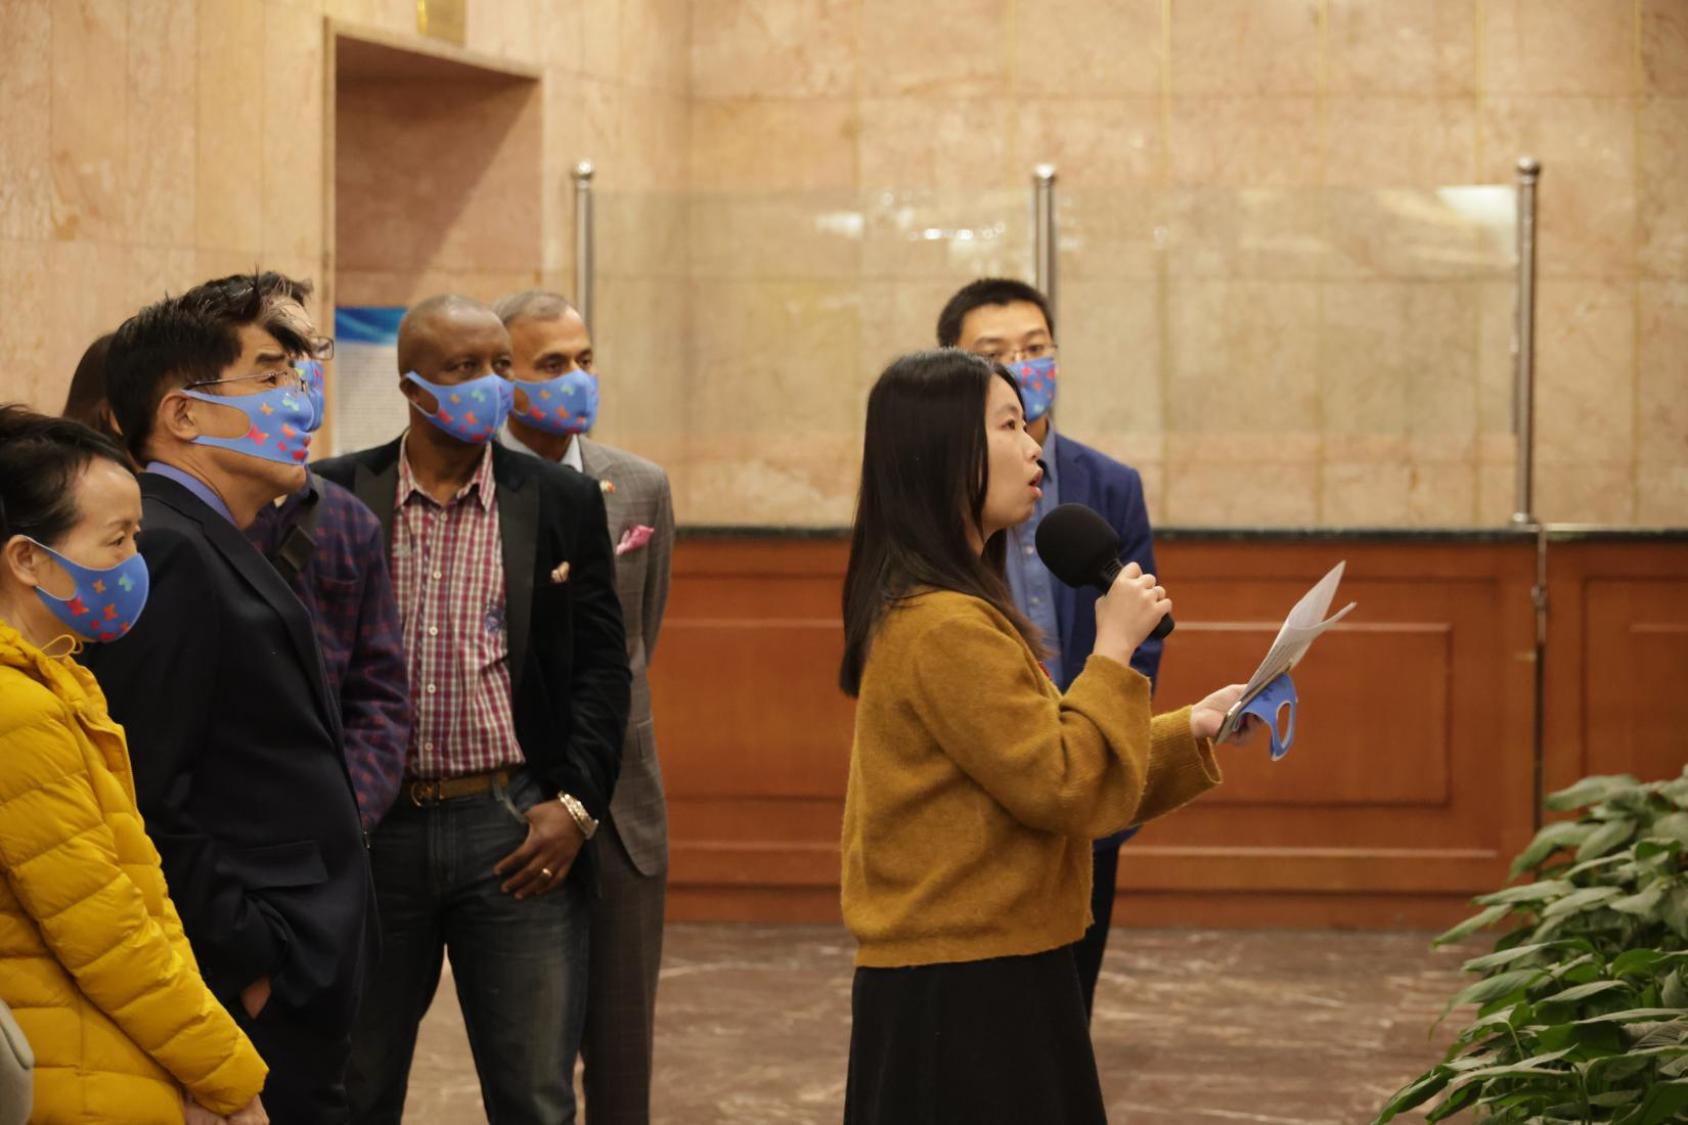 Weng Huiling (in front, holding a microphone) guides an exhibition tour on Zero Discrimination Day.